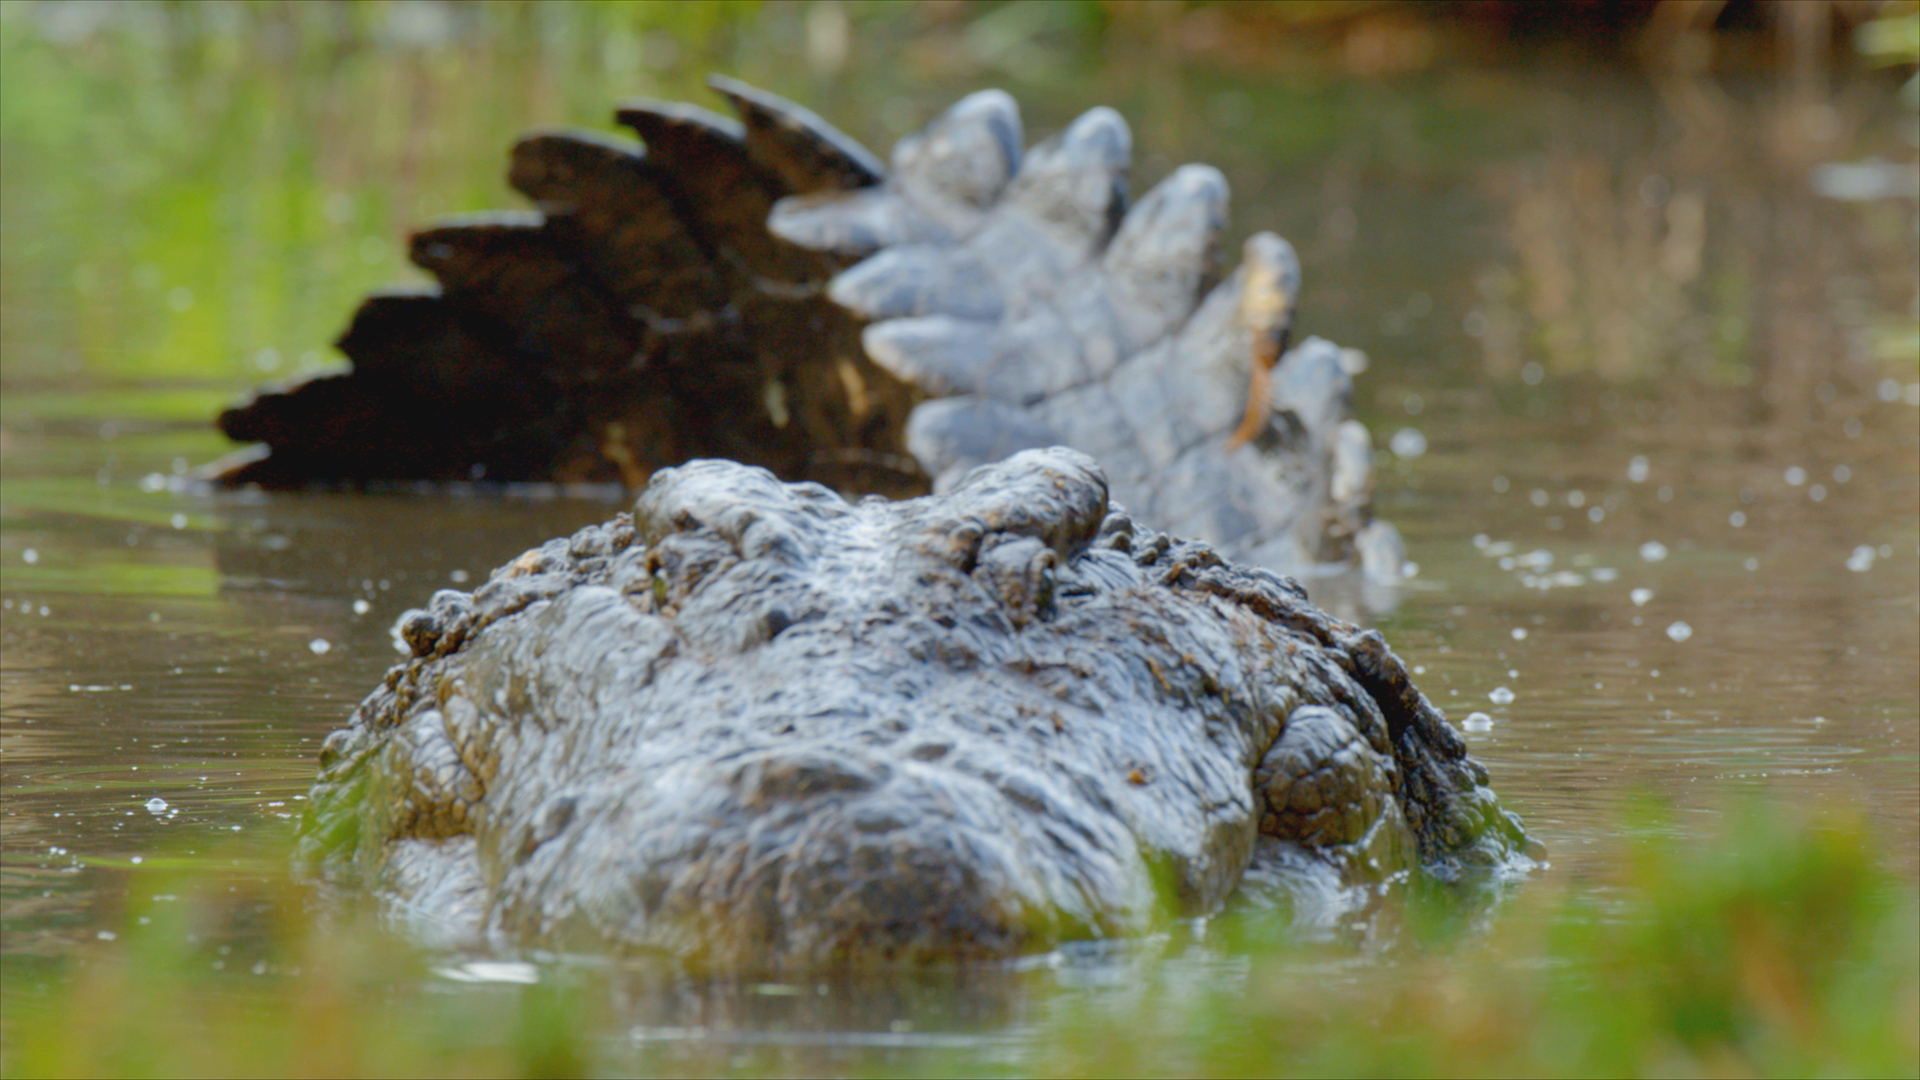 Crocodile swimming. This is from Madagascar's Weirdest. [Photo of the day - May 2022]